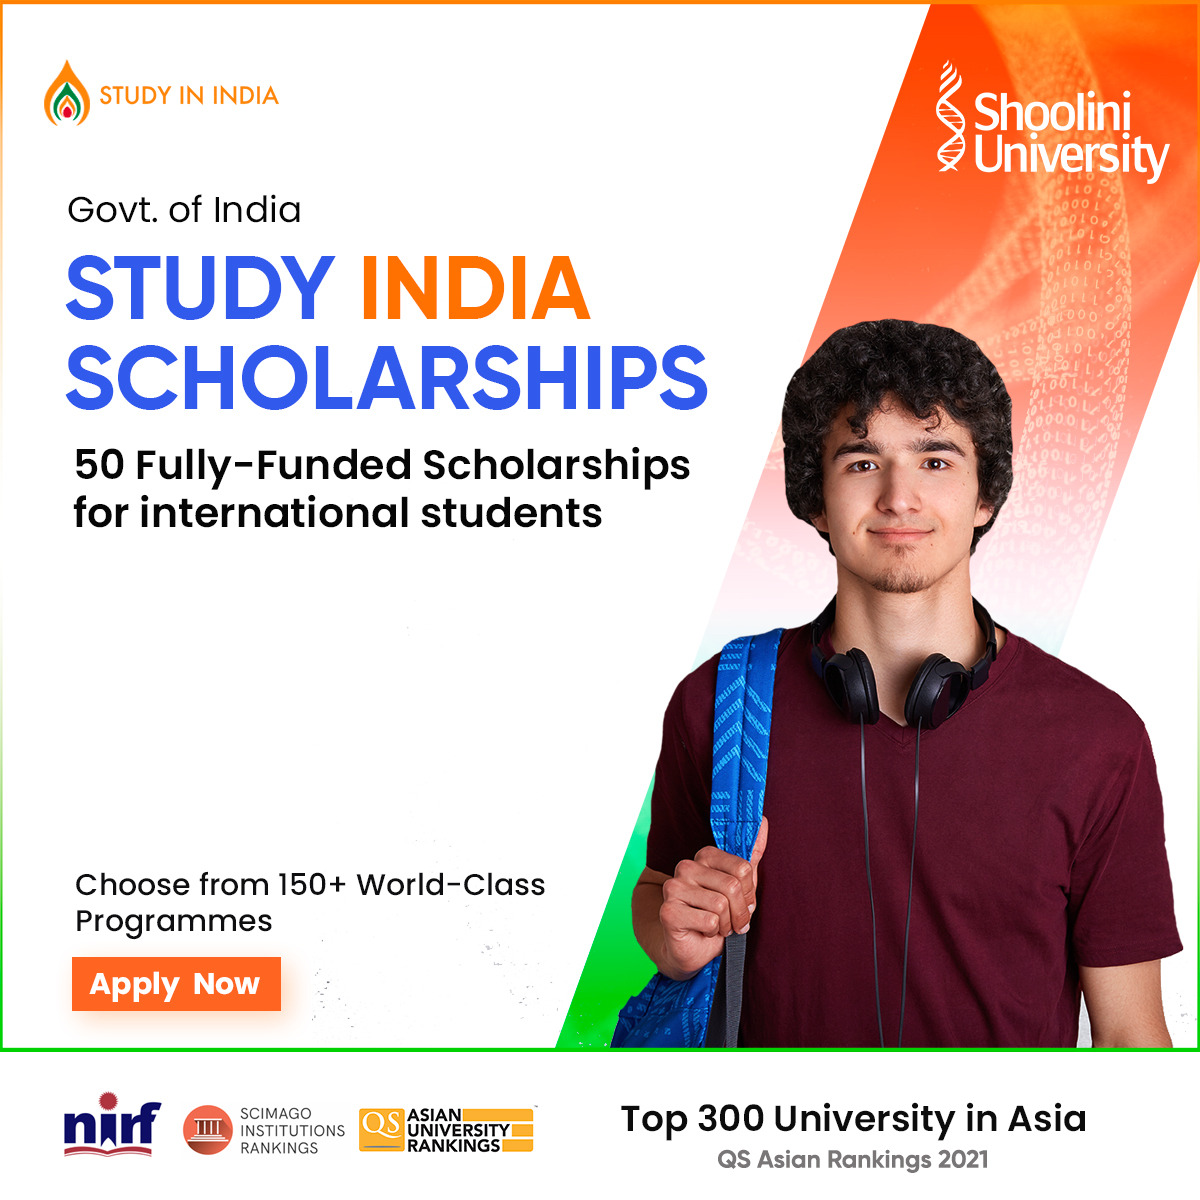 Shoolini selected for Study-in-India scholarship programme